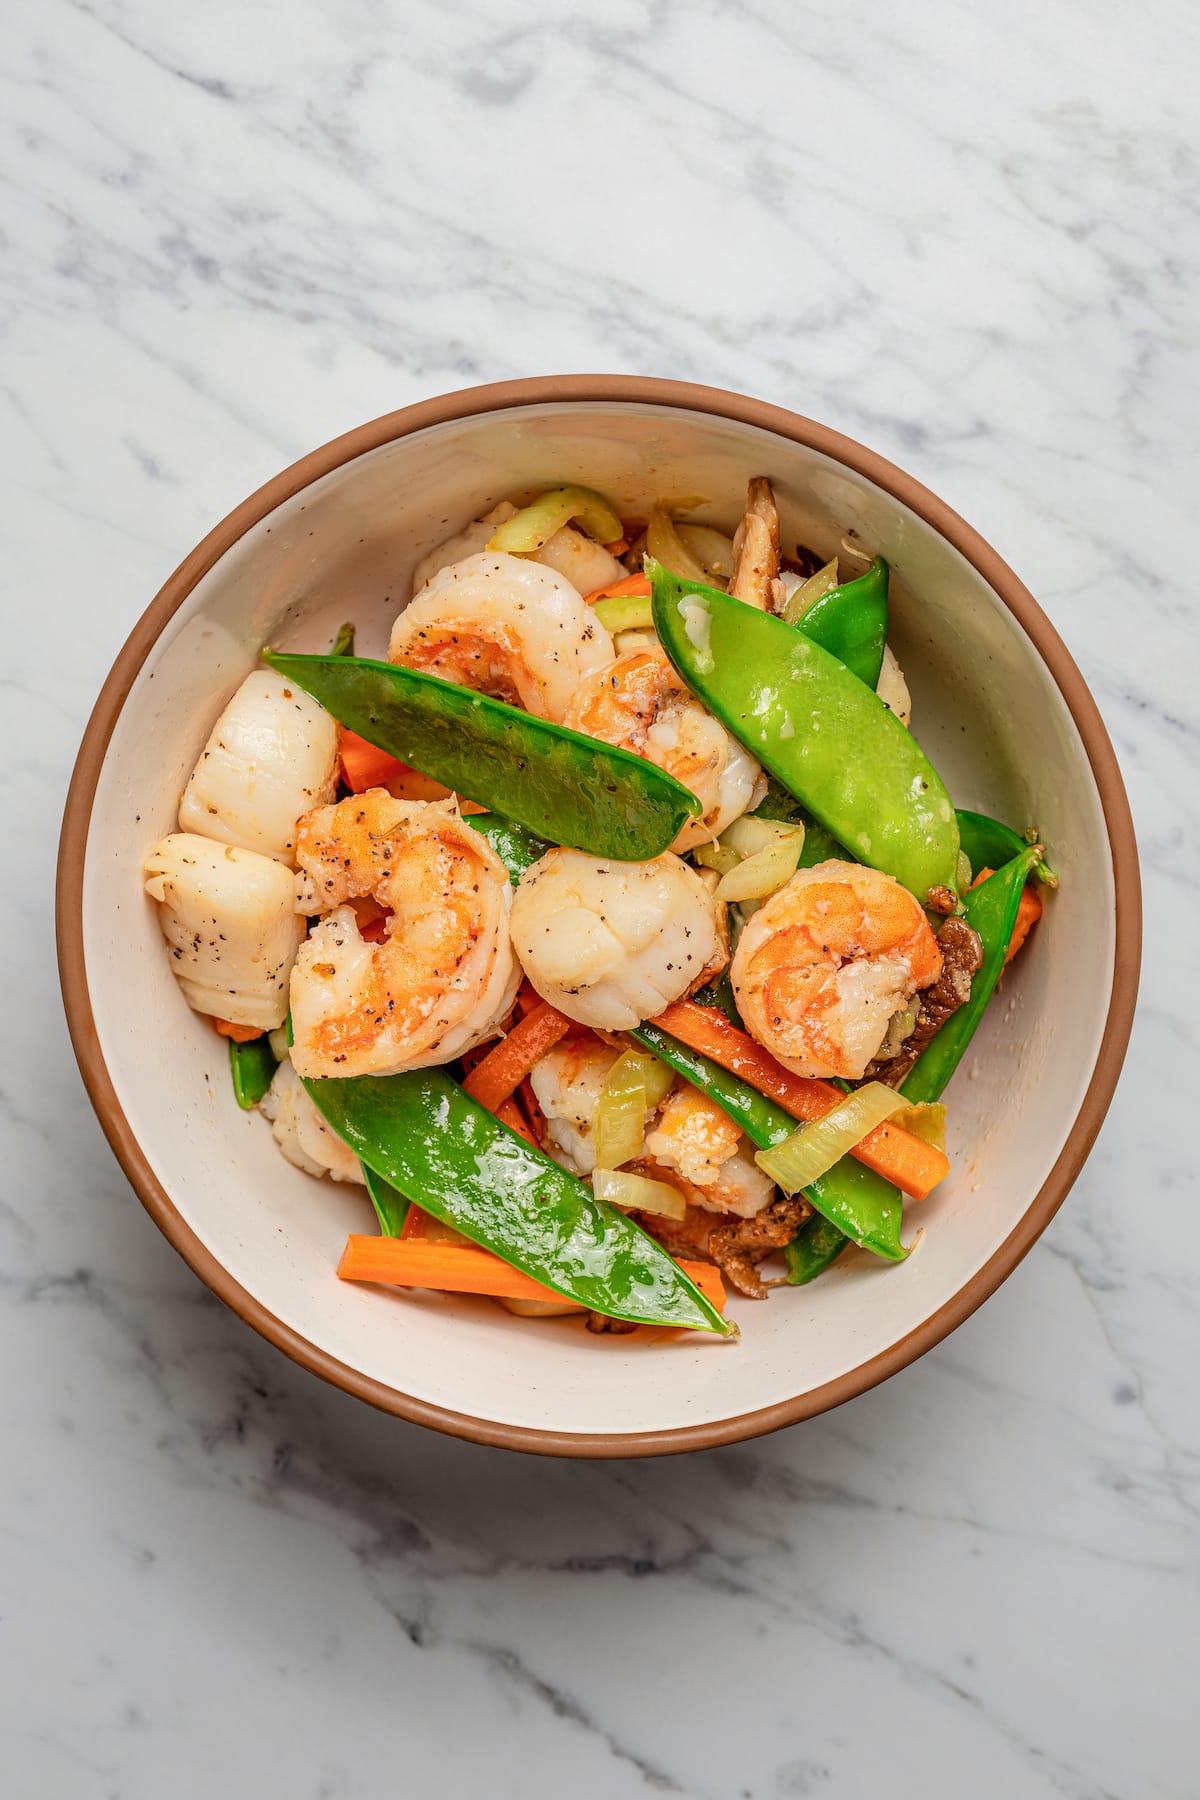 Adding stir-fried veggies and seafood to a bowl.